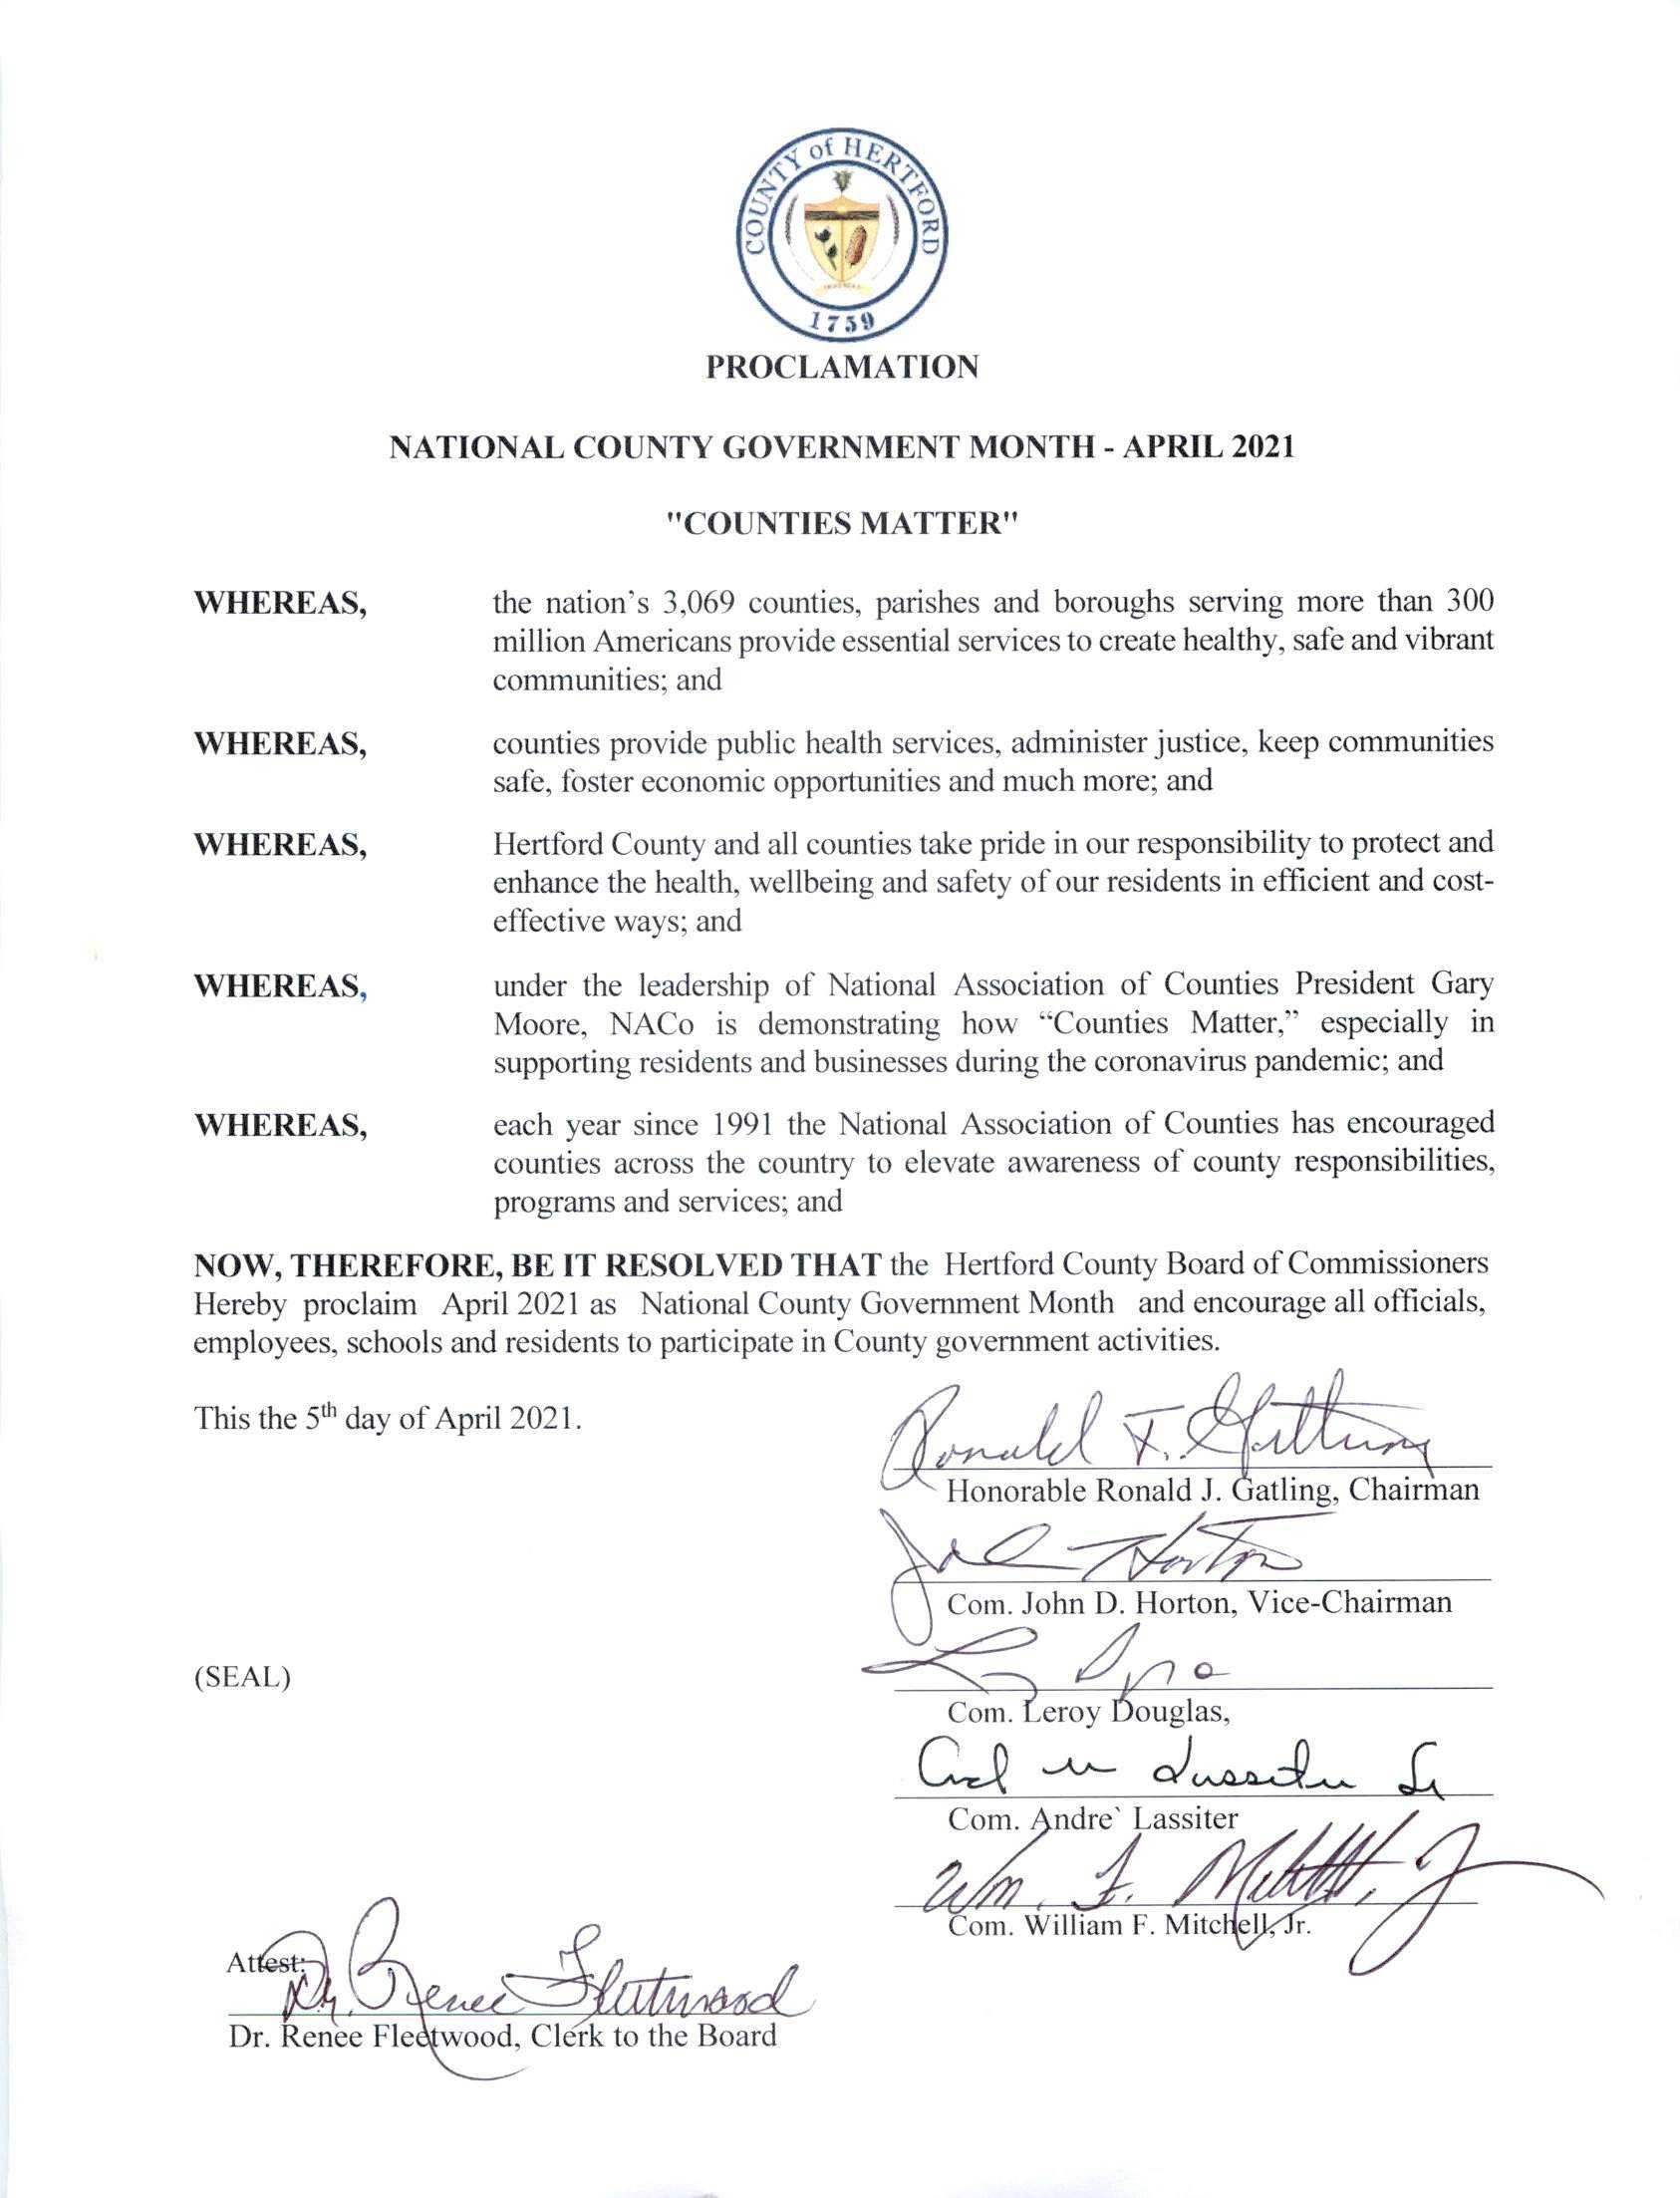 Counties Matter_Proclamation NCGM-April 2021